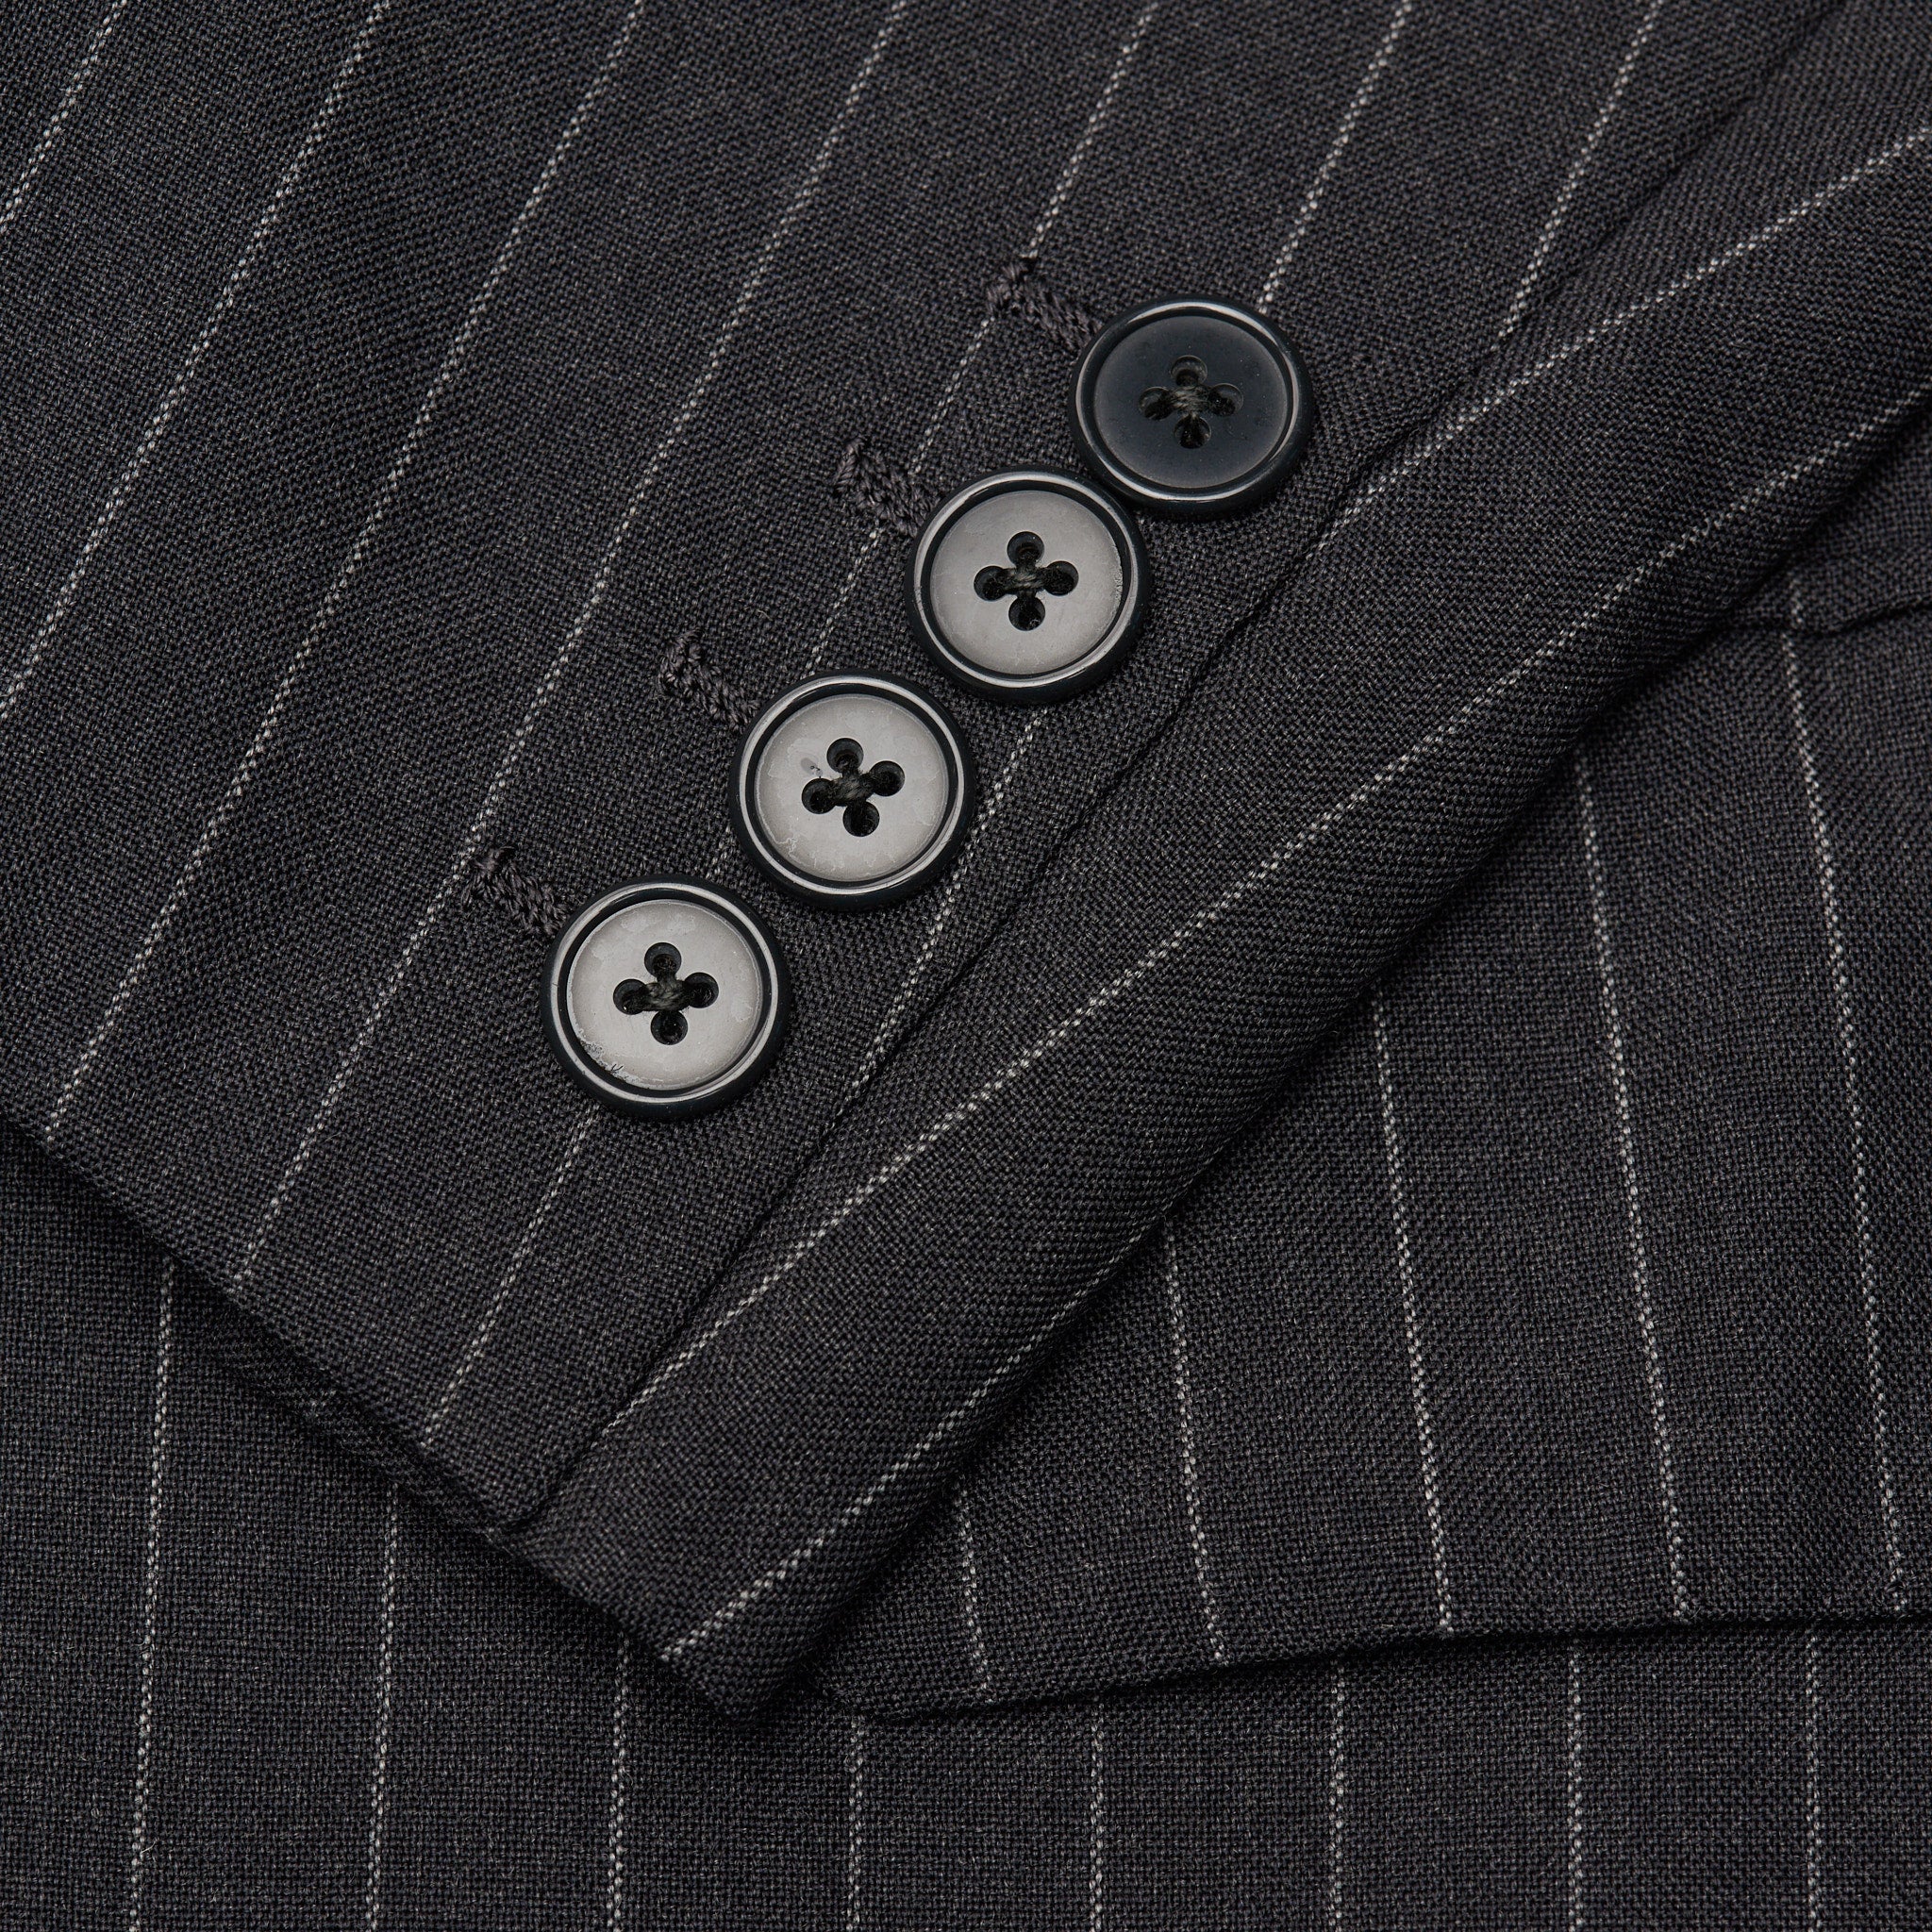 ANDERSON & SHEPPARD Savile Row Bespoke Gray Striped Wool-Mohair Suit US 44 ANDERSON & SHEPPARD